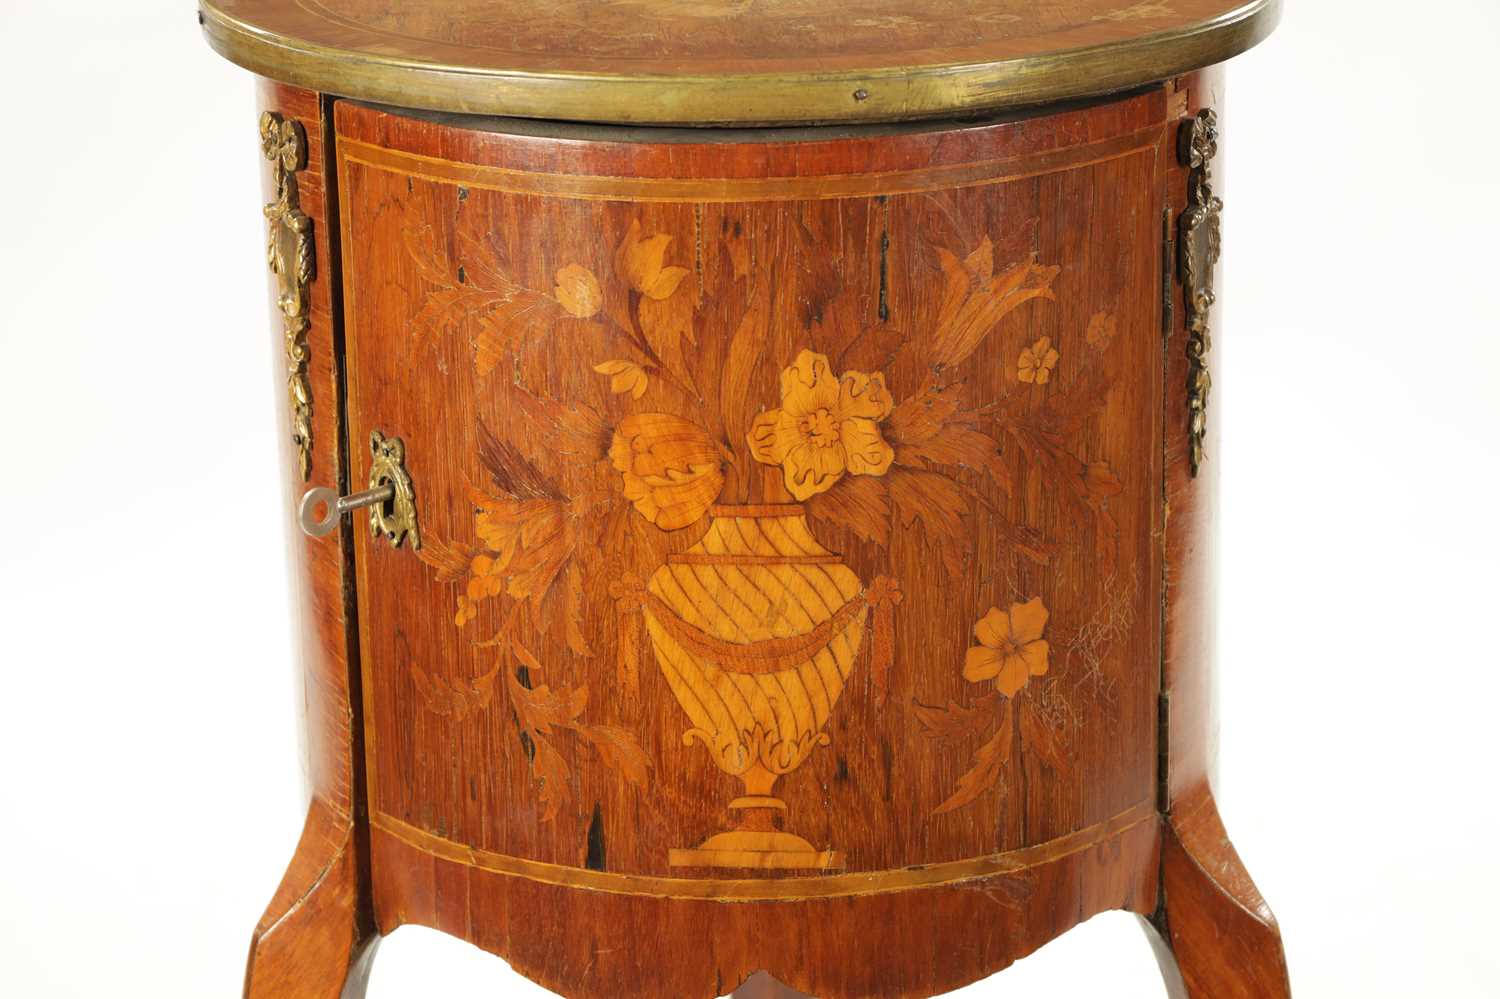 A 19TH CENTURY FRENCH WALNUT MARQUETRY CIRCULAR BEDSIDE CABINET - Image 5 of 9